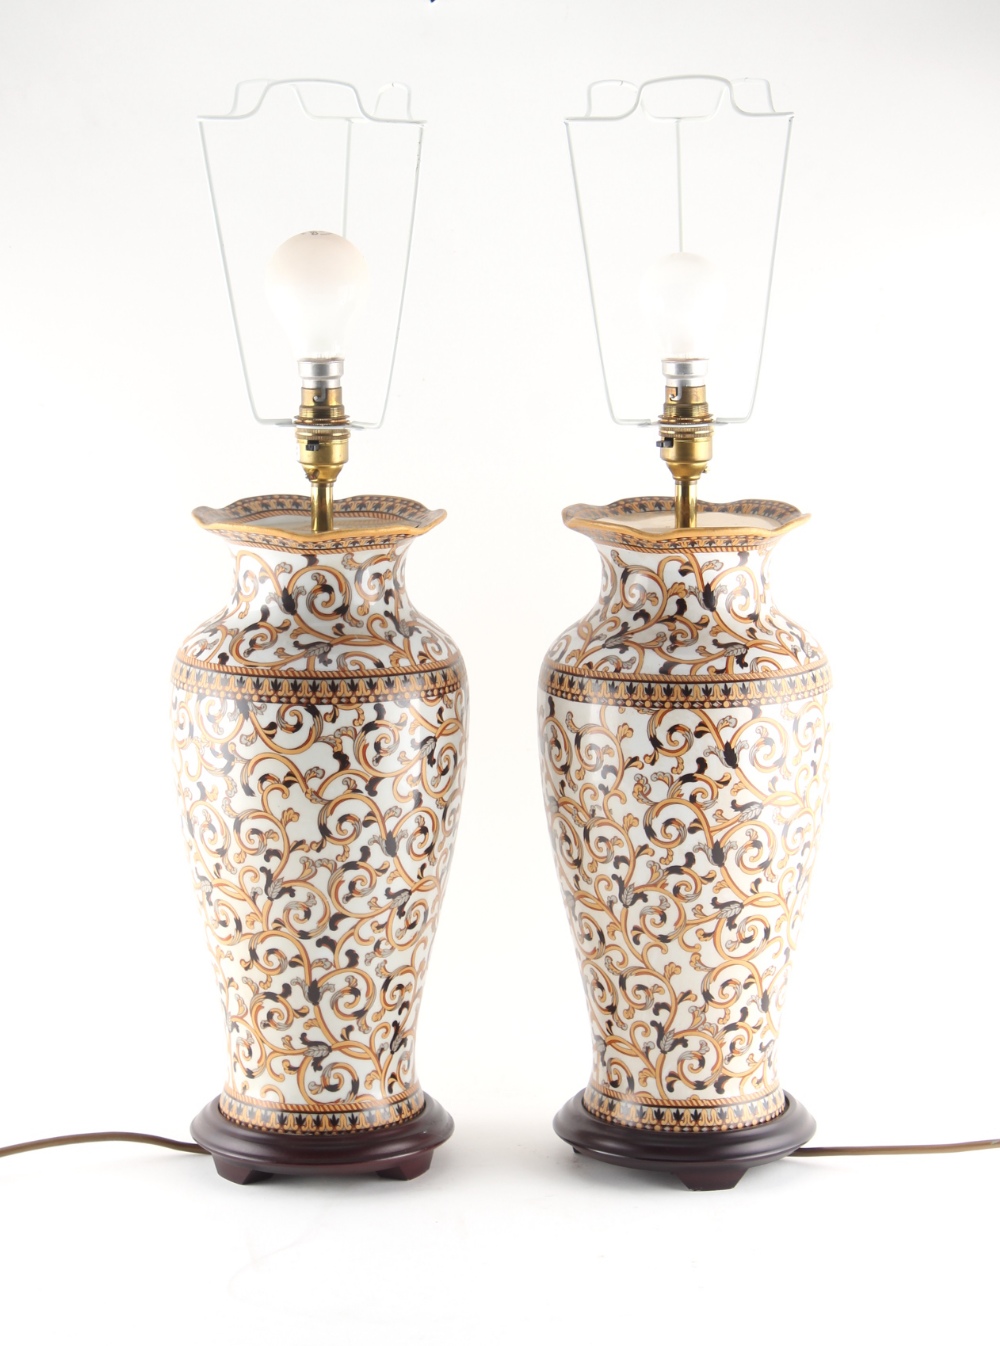 Property of a deceased estate - a pair of modern porcelain table lamps in the maiolica style, with